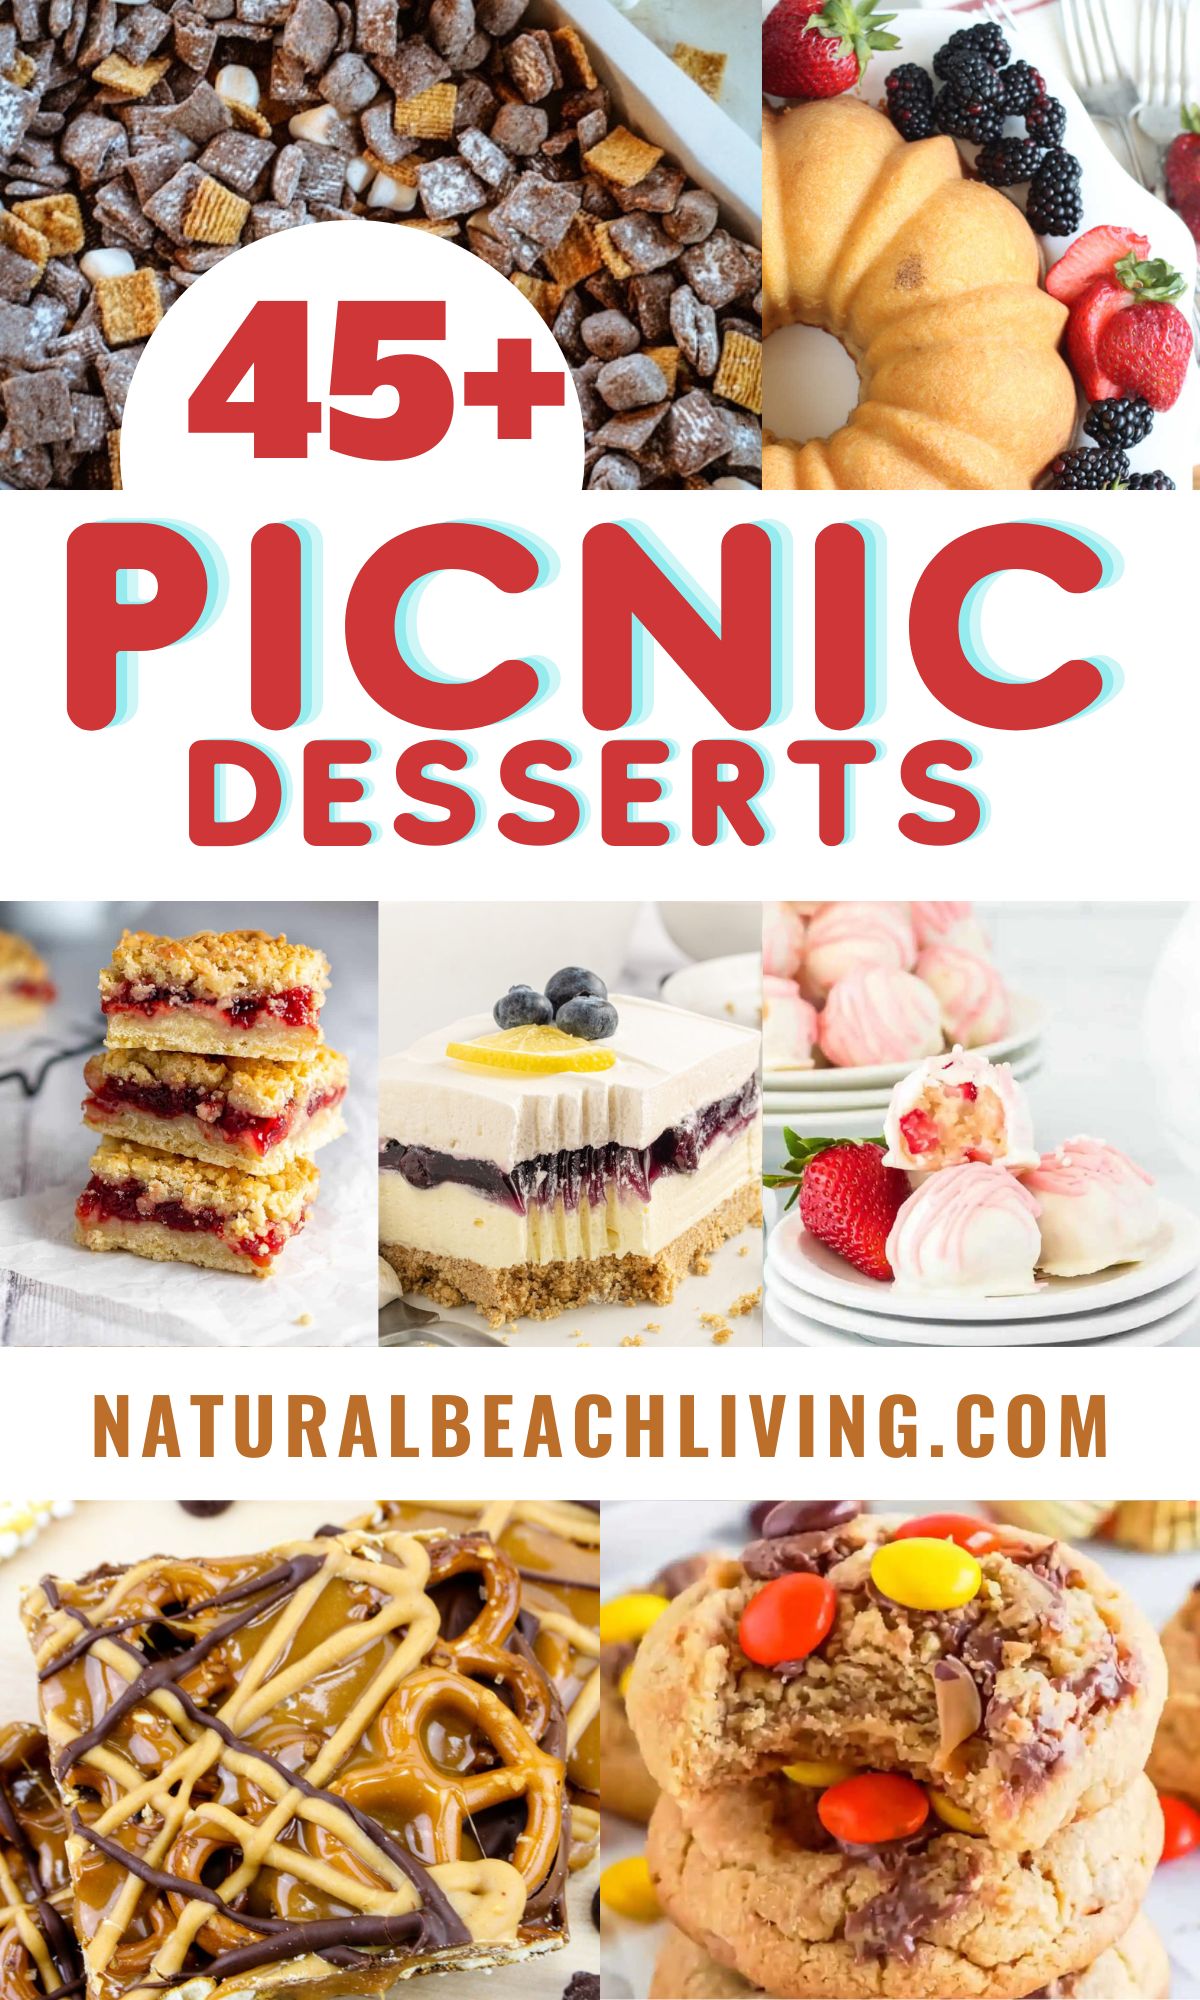 45+ Delicious Picnic Desserts That Are Perfect for Hot Days